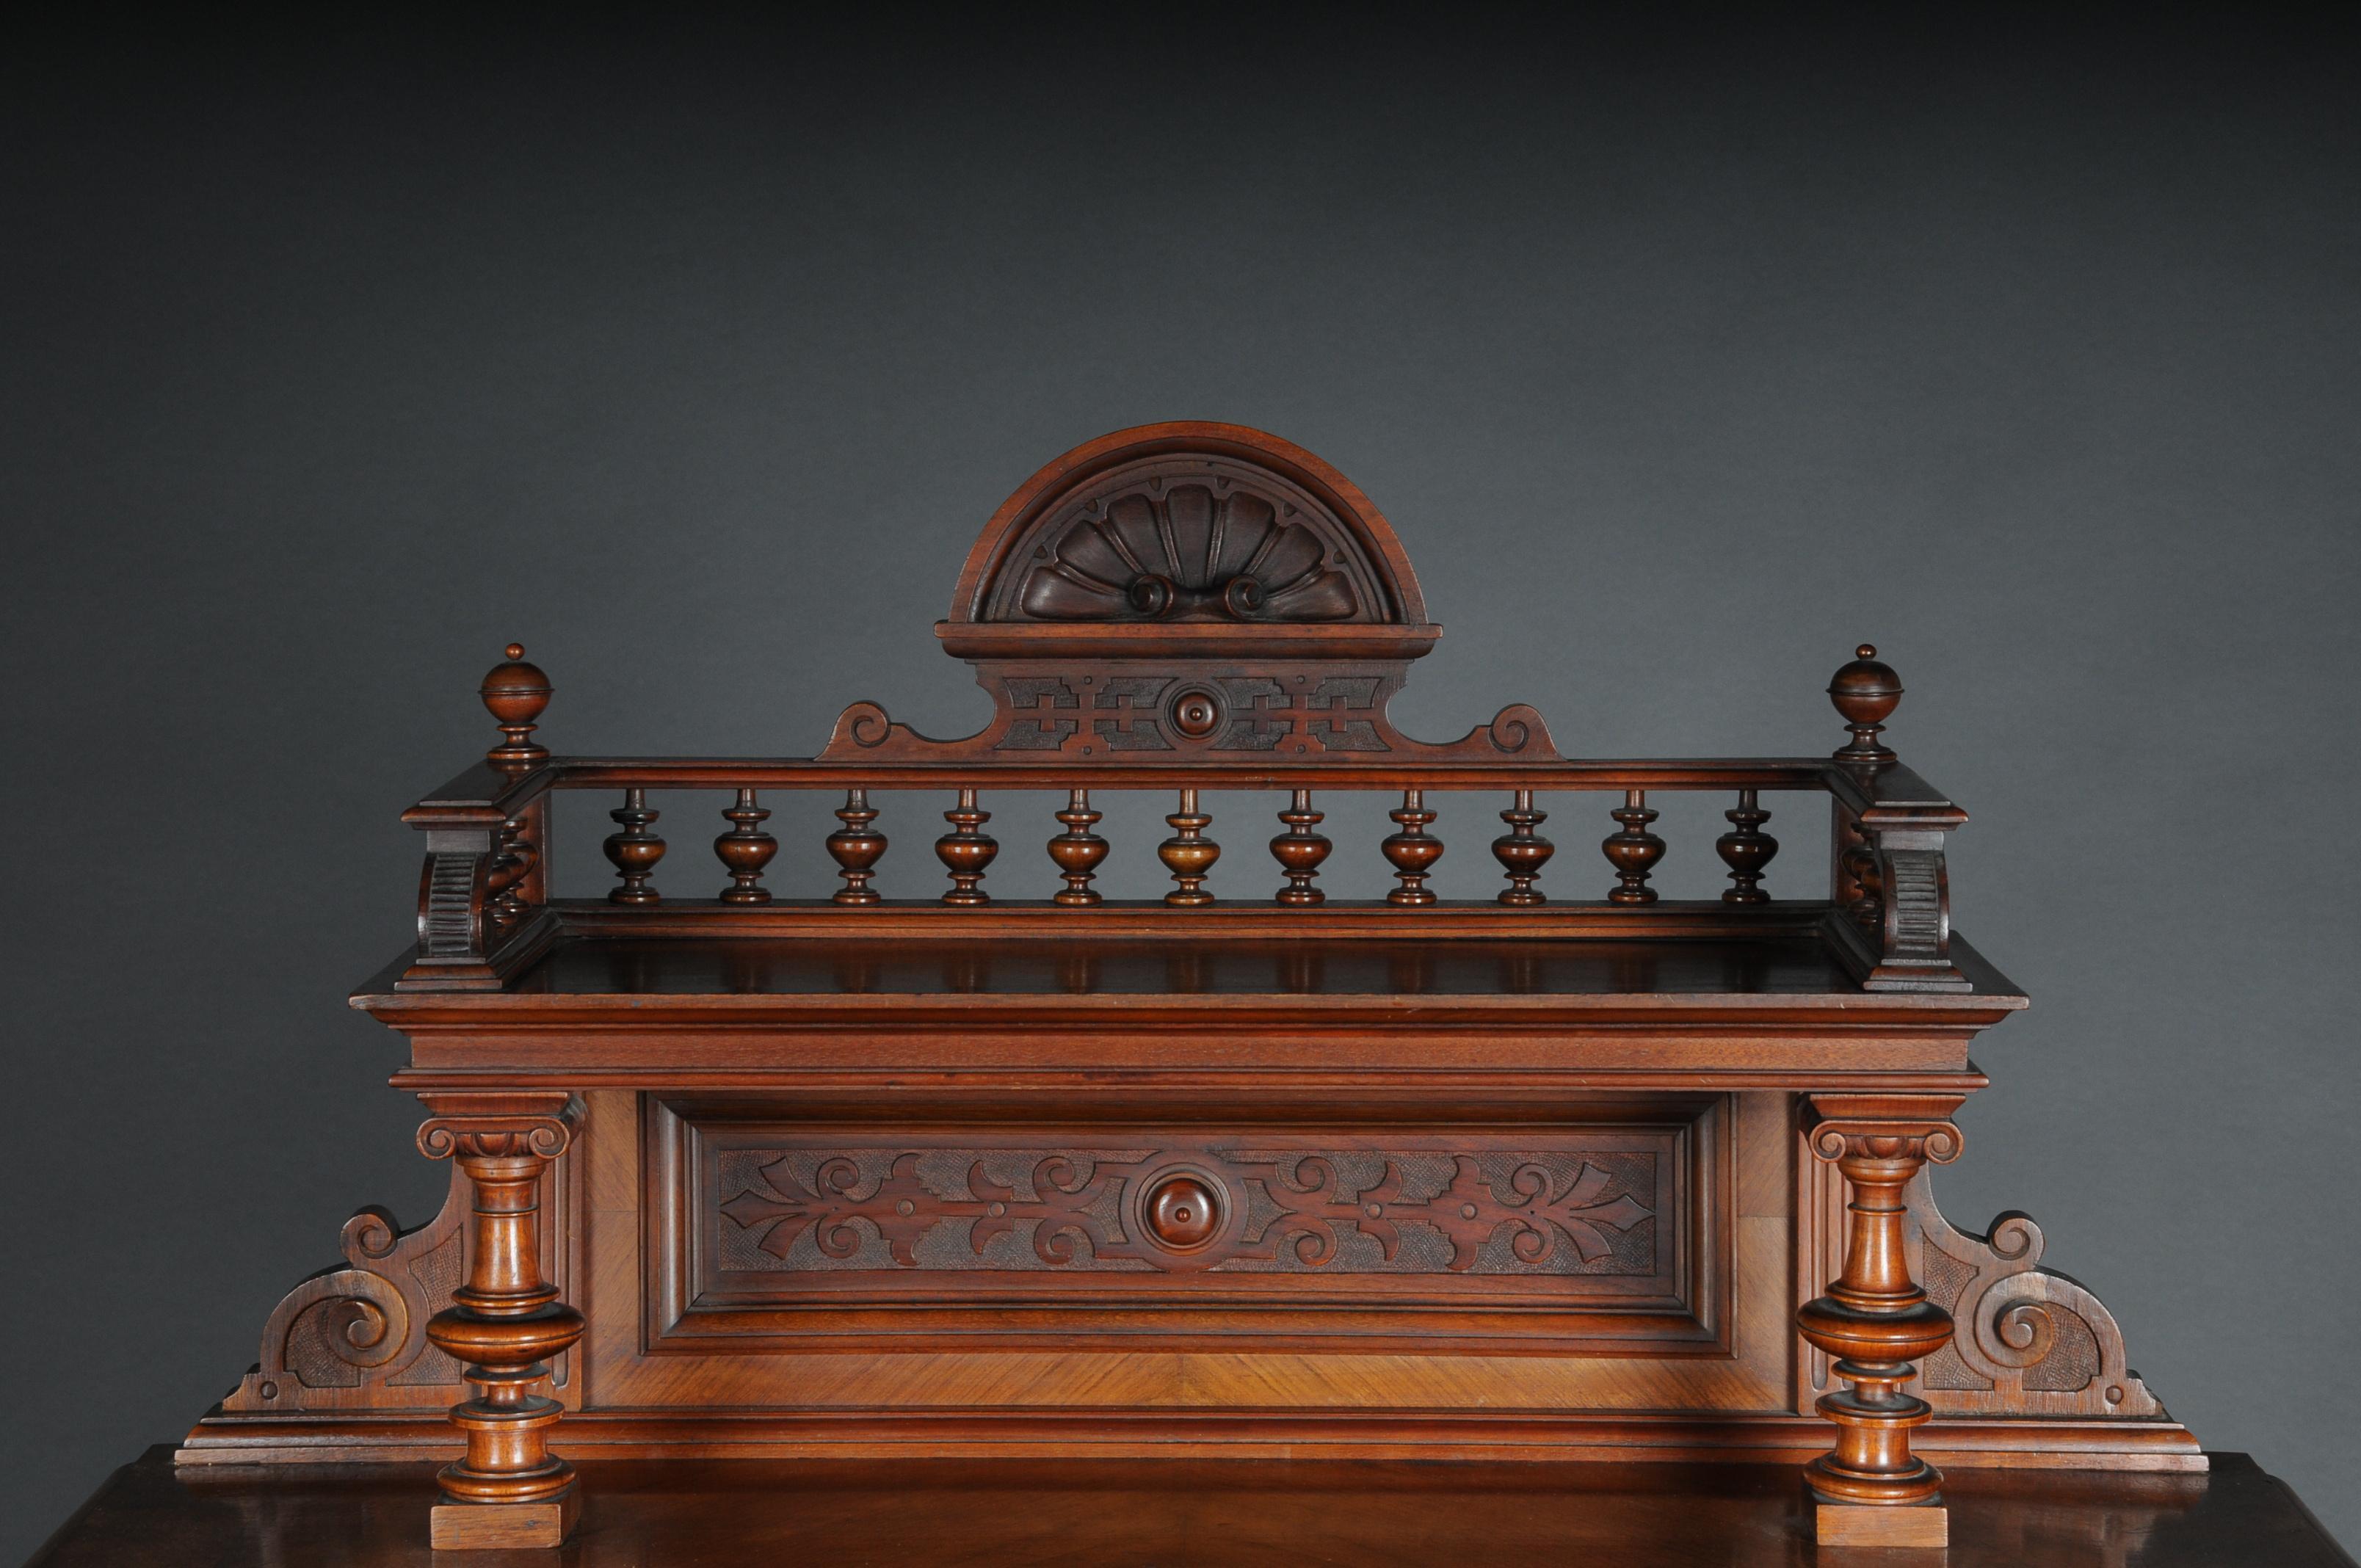 Historicism cabinet top cabinet / sideboard circa 1870, walnut

Walnut with rich decorative carving. Two-door body with columns and drawer. Cake stand with gallery frame and shell top. Brass handles and decorative fittings, circa